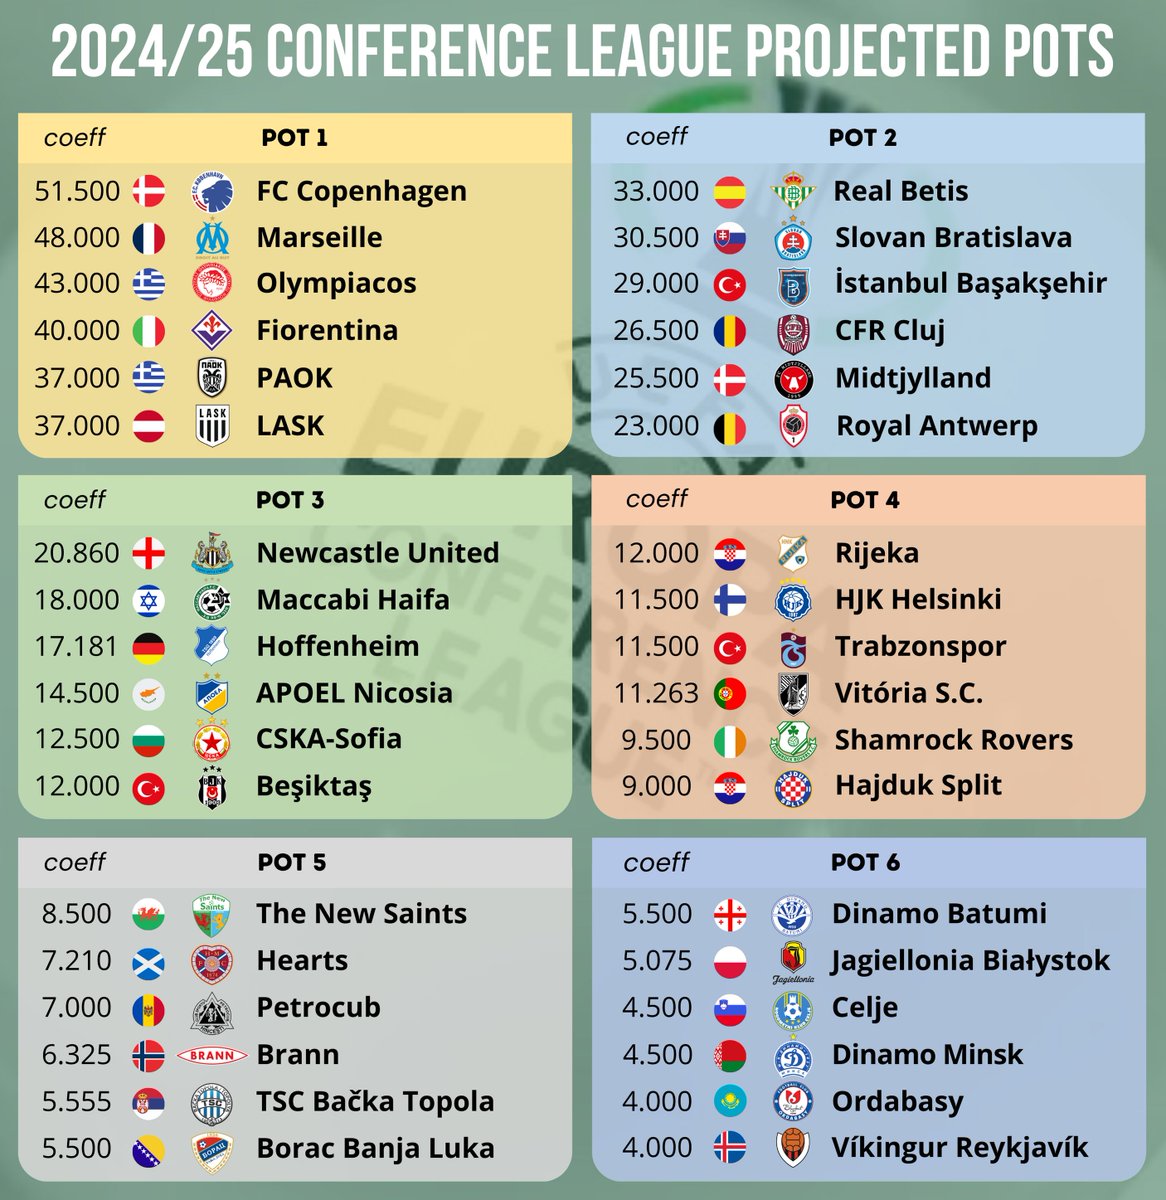 ⚽️ Amazing football weekend has started! - Here are currently projected pots of all three 2024/25 European competitions. - Let's see how many confirmation and changes in the projected pots we'll get during this weekend.